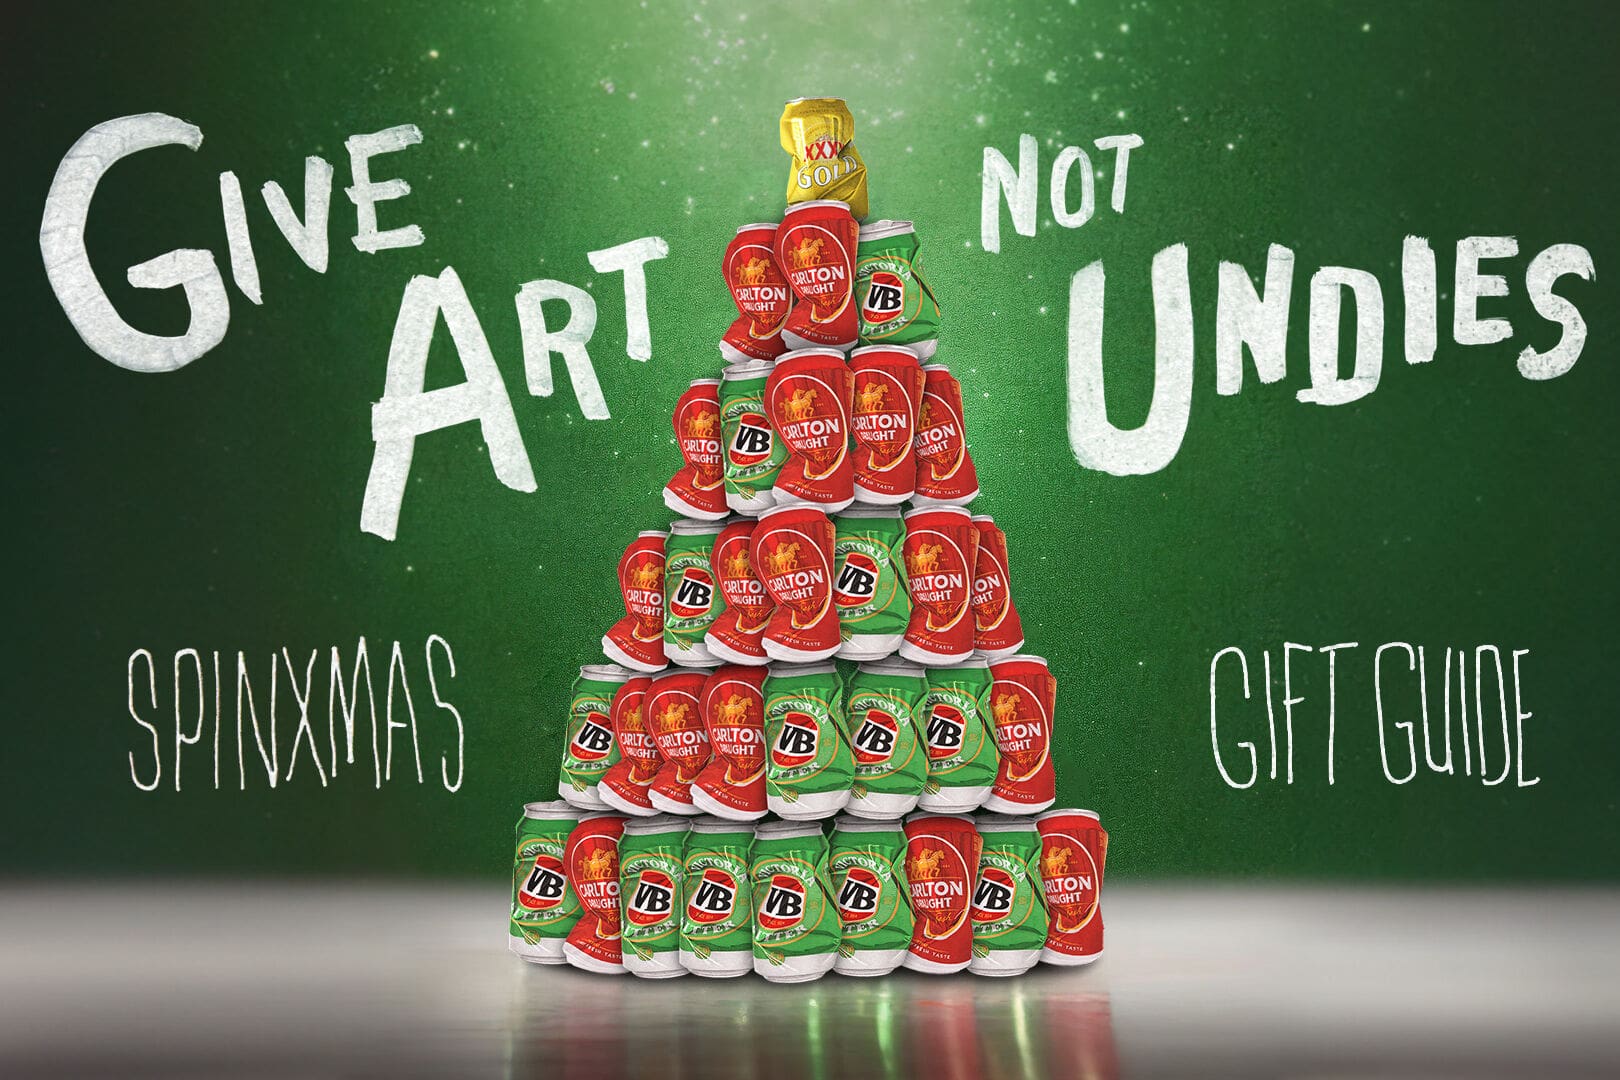 Give Art Not Undies - Spinxmas Christmas gift guide artwork with beer can Xmas tree